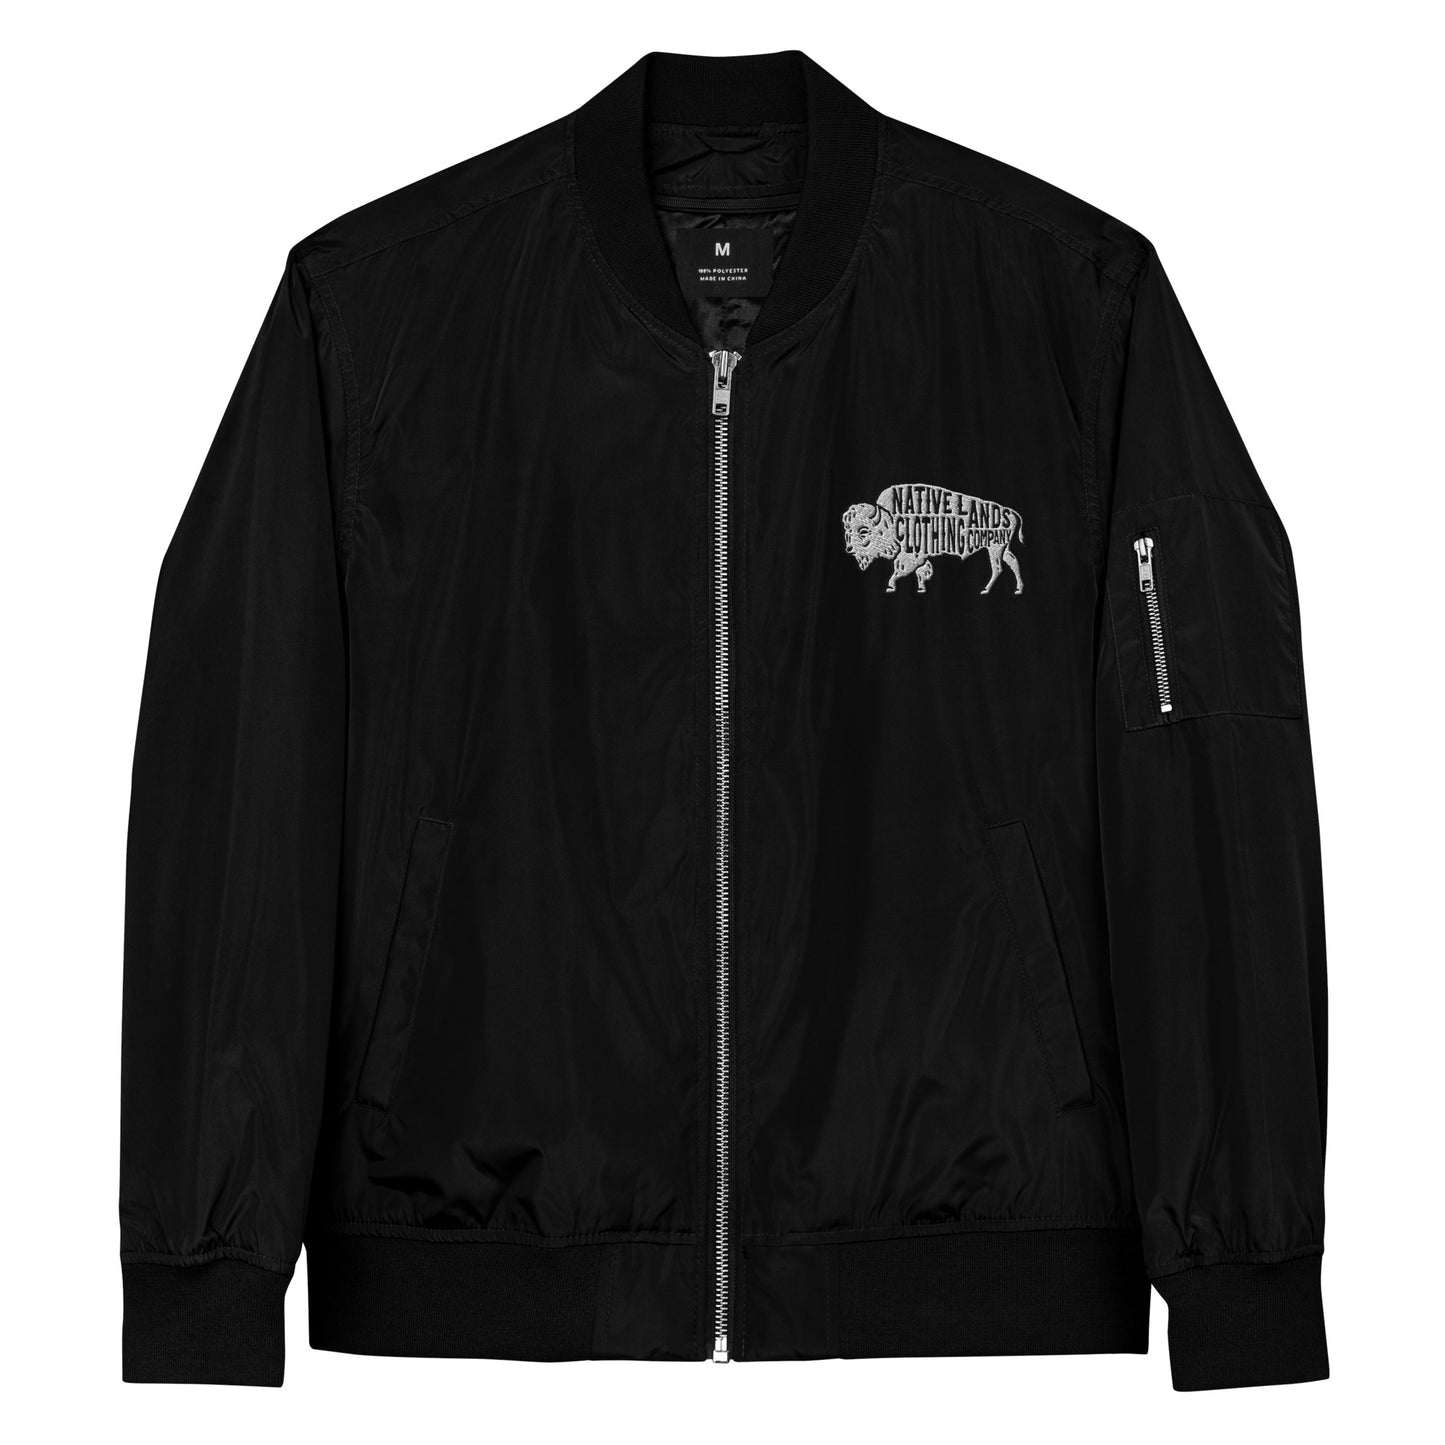 Bison Bomber Jacket Recycled Embroidered Native American